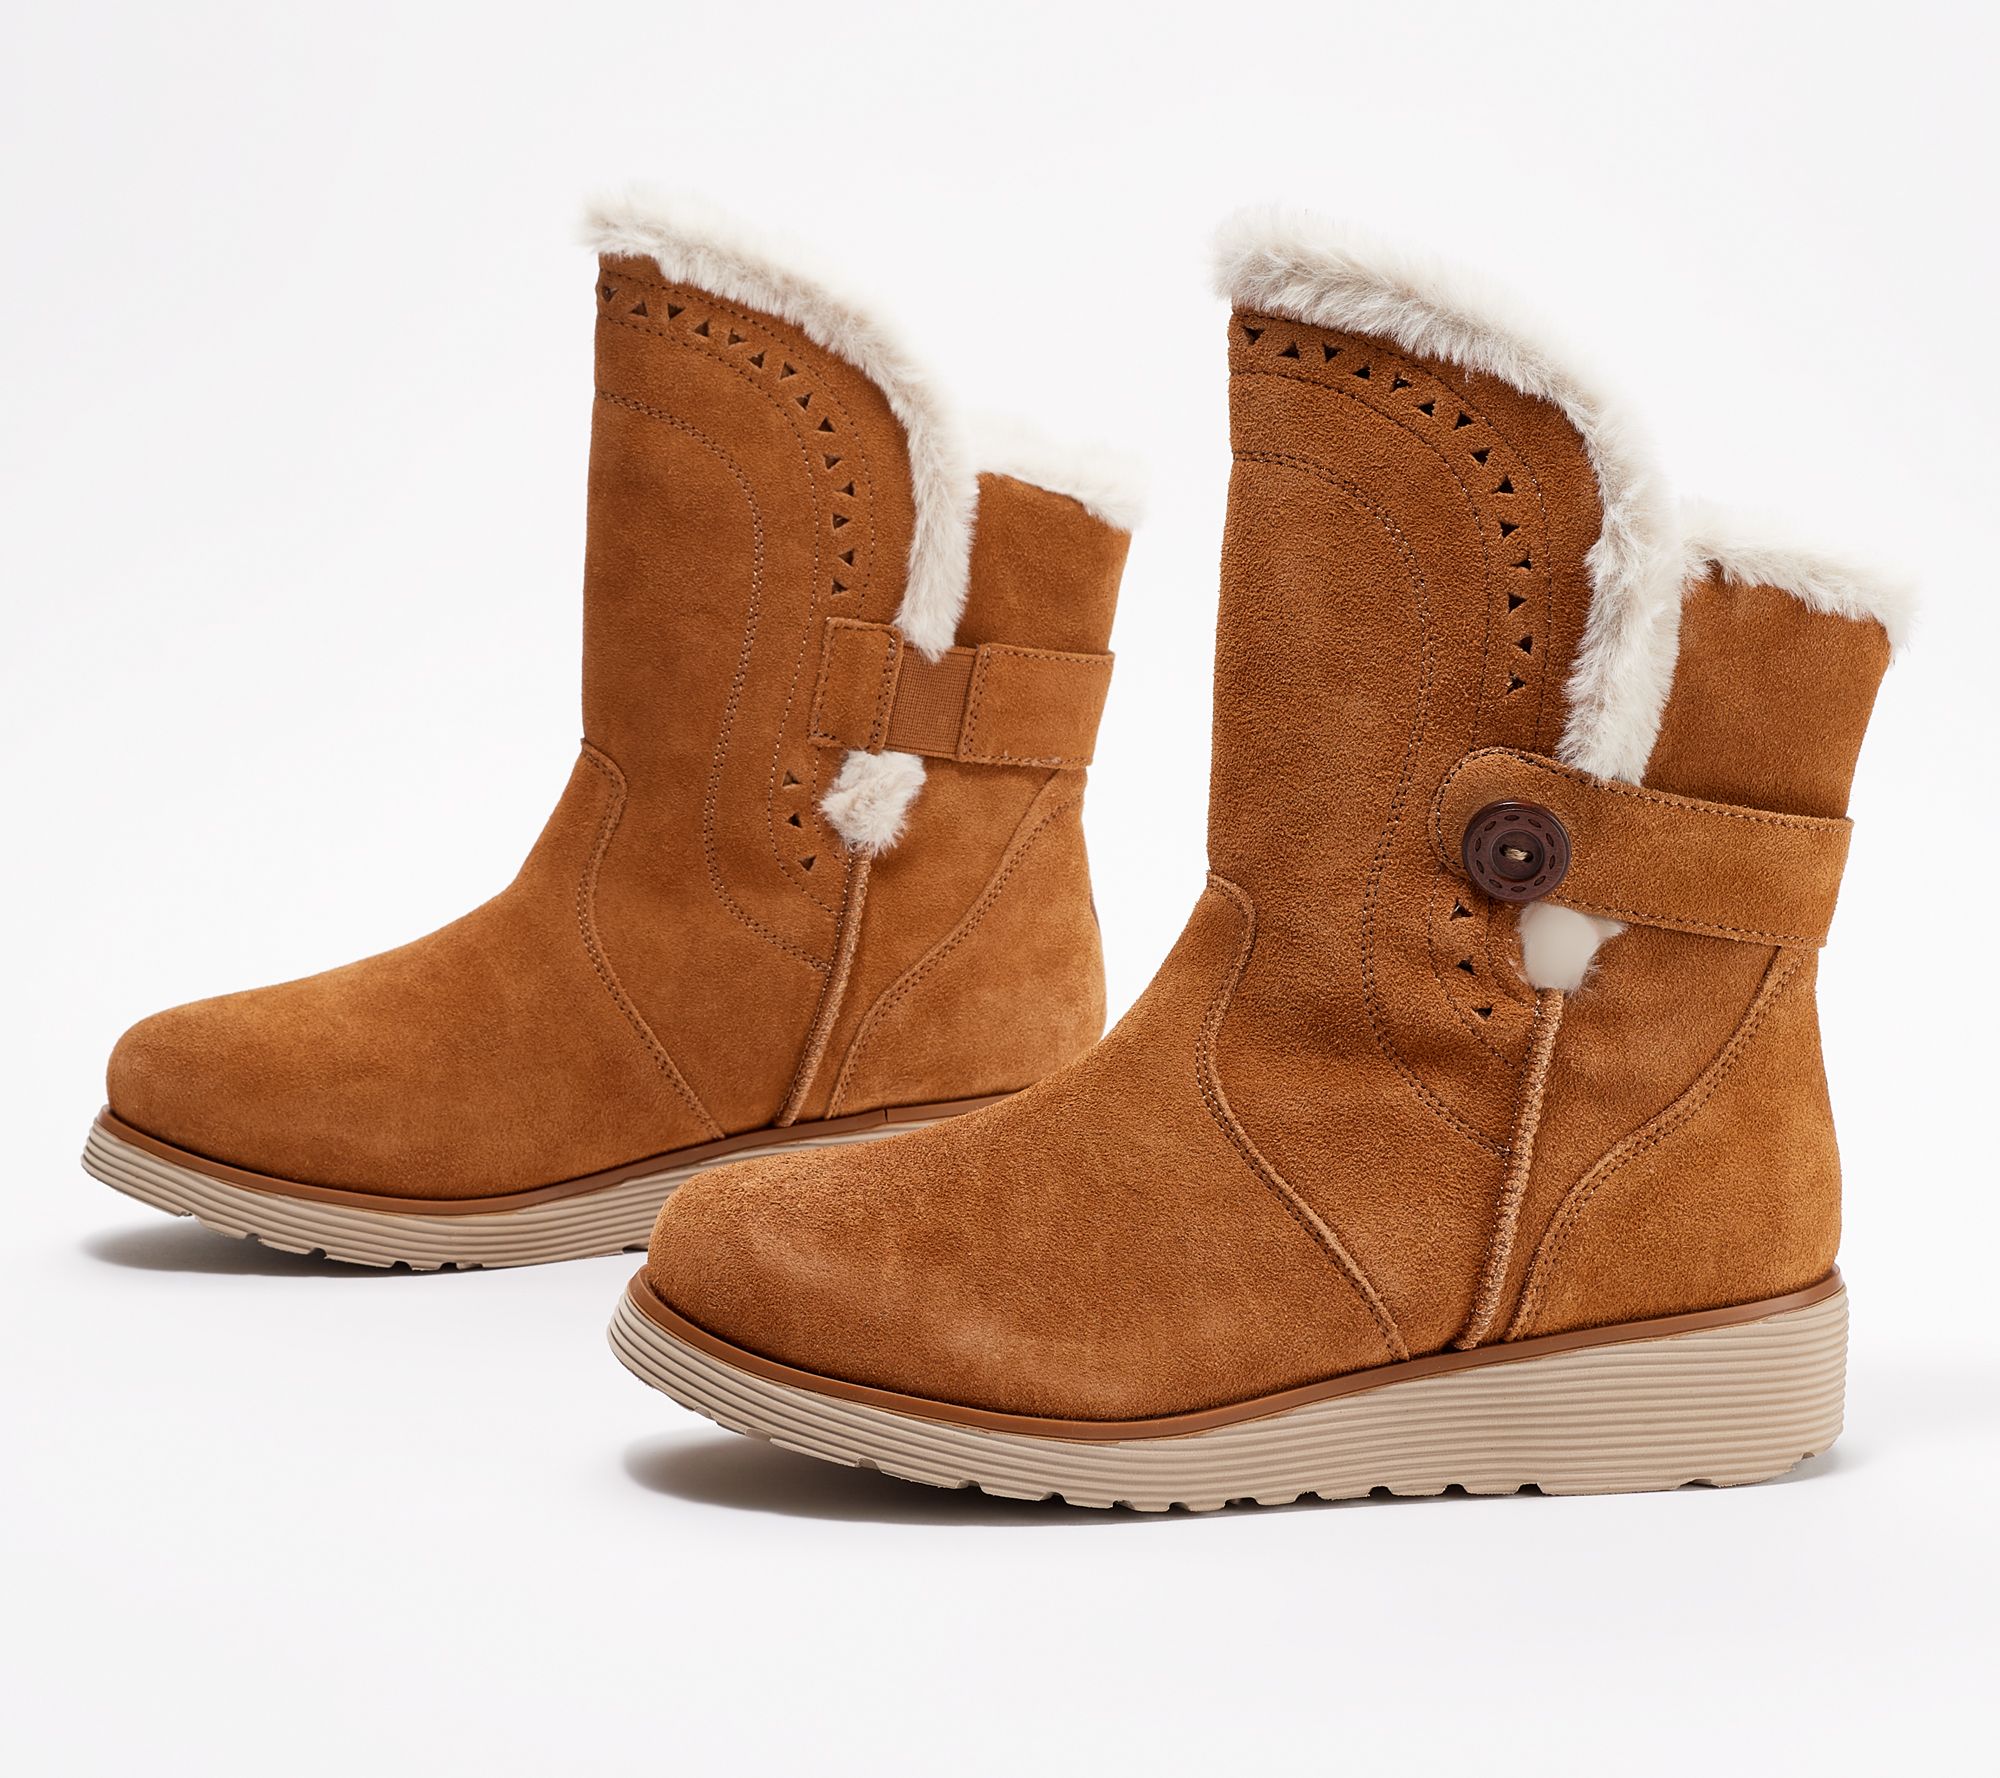 skechers suede leather boots